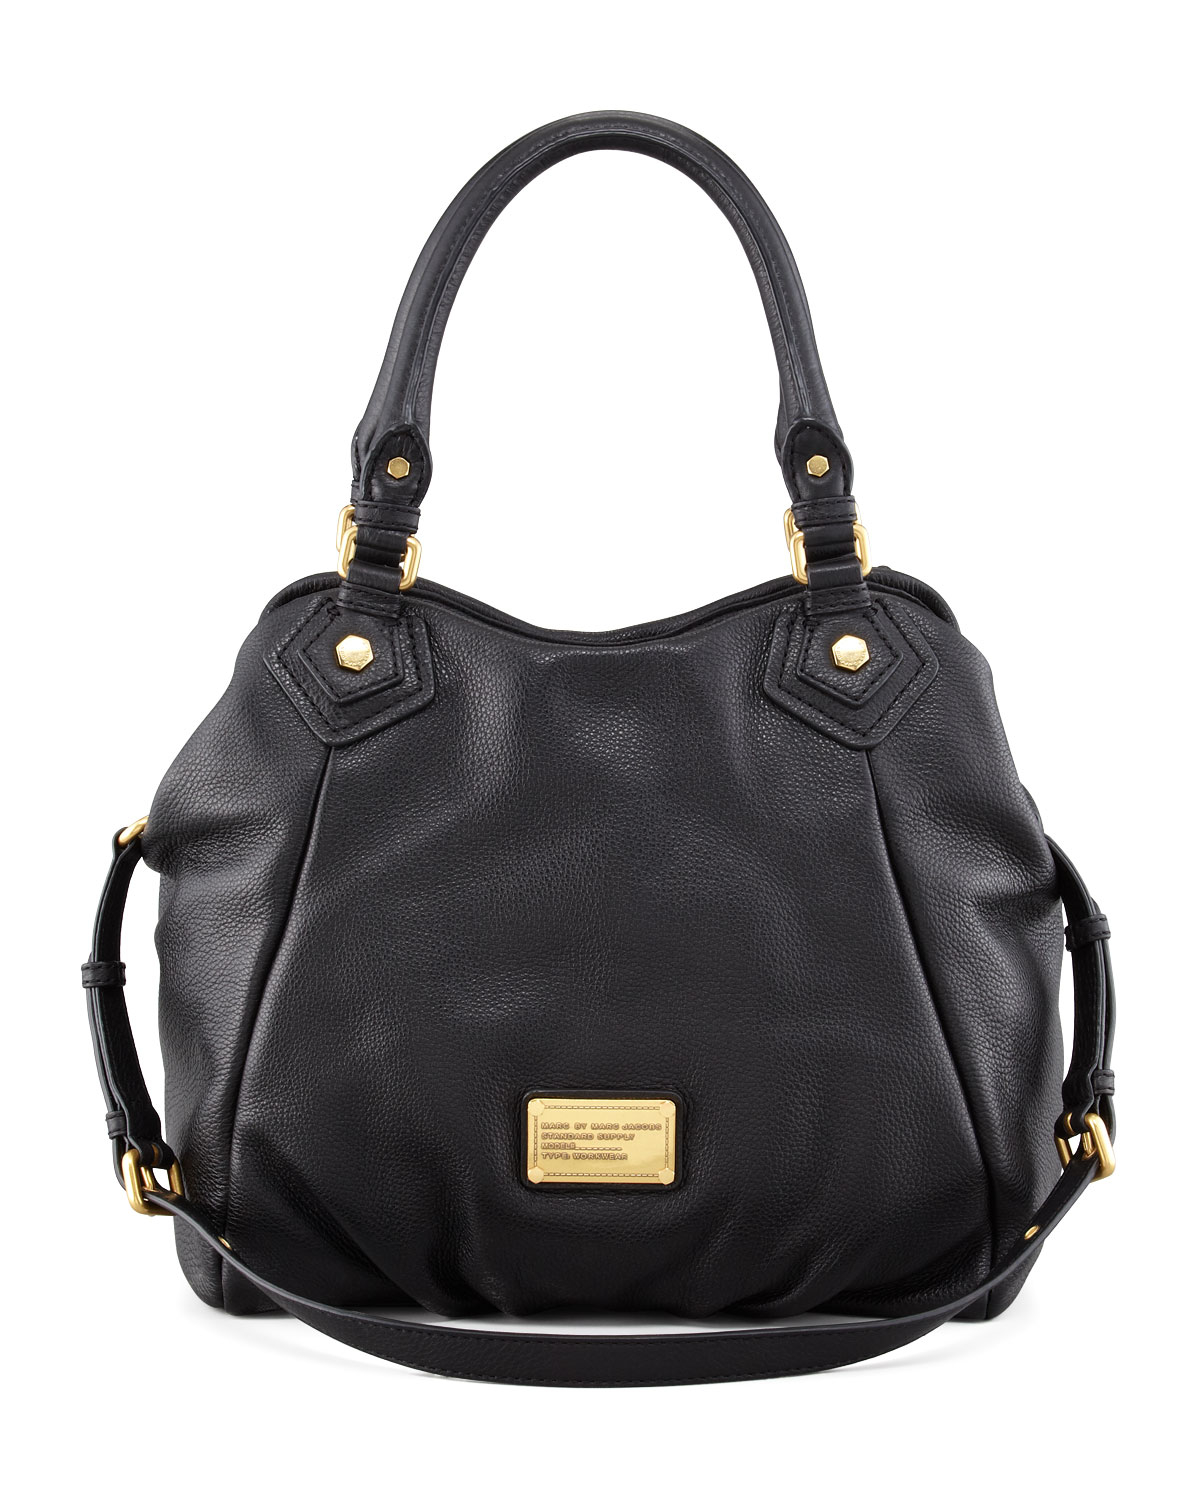 Lyst - Marc By Marc Jacobs Classic Q Fran Hobo Bag in Black